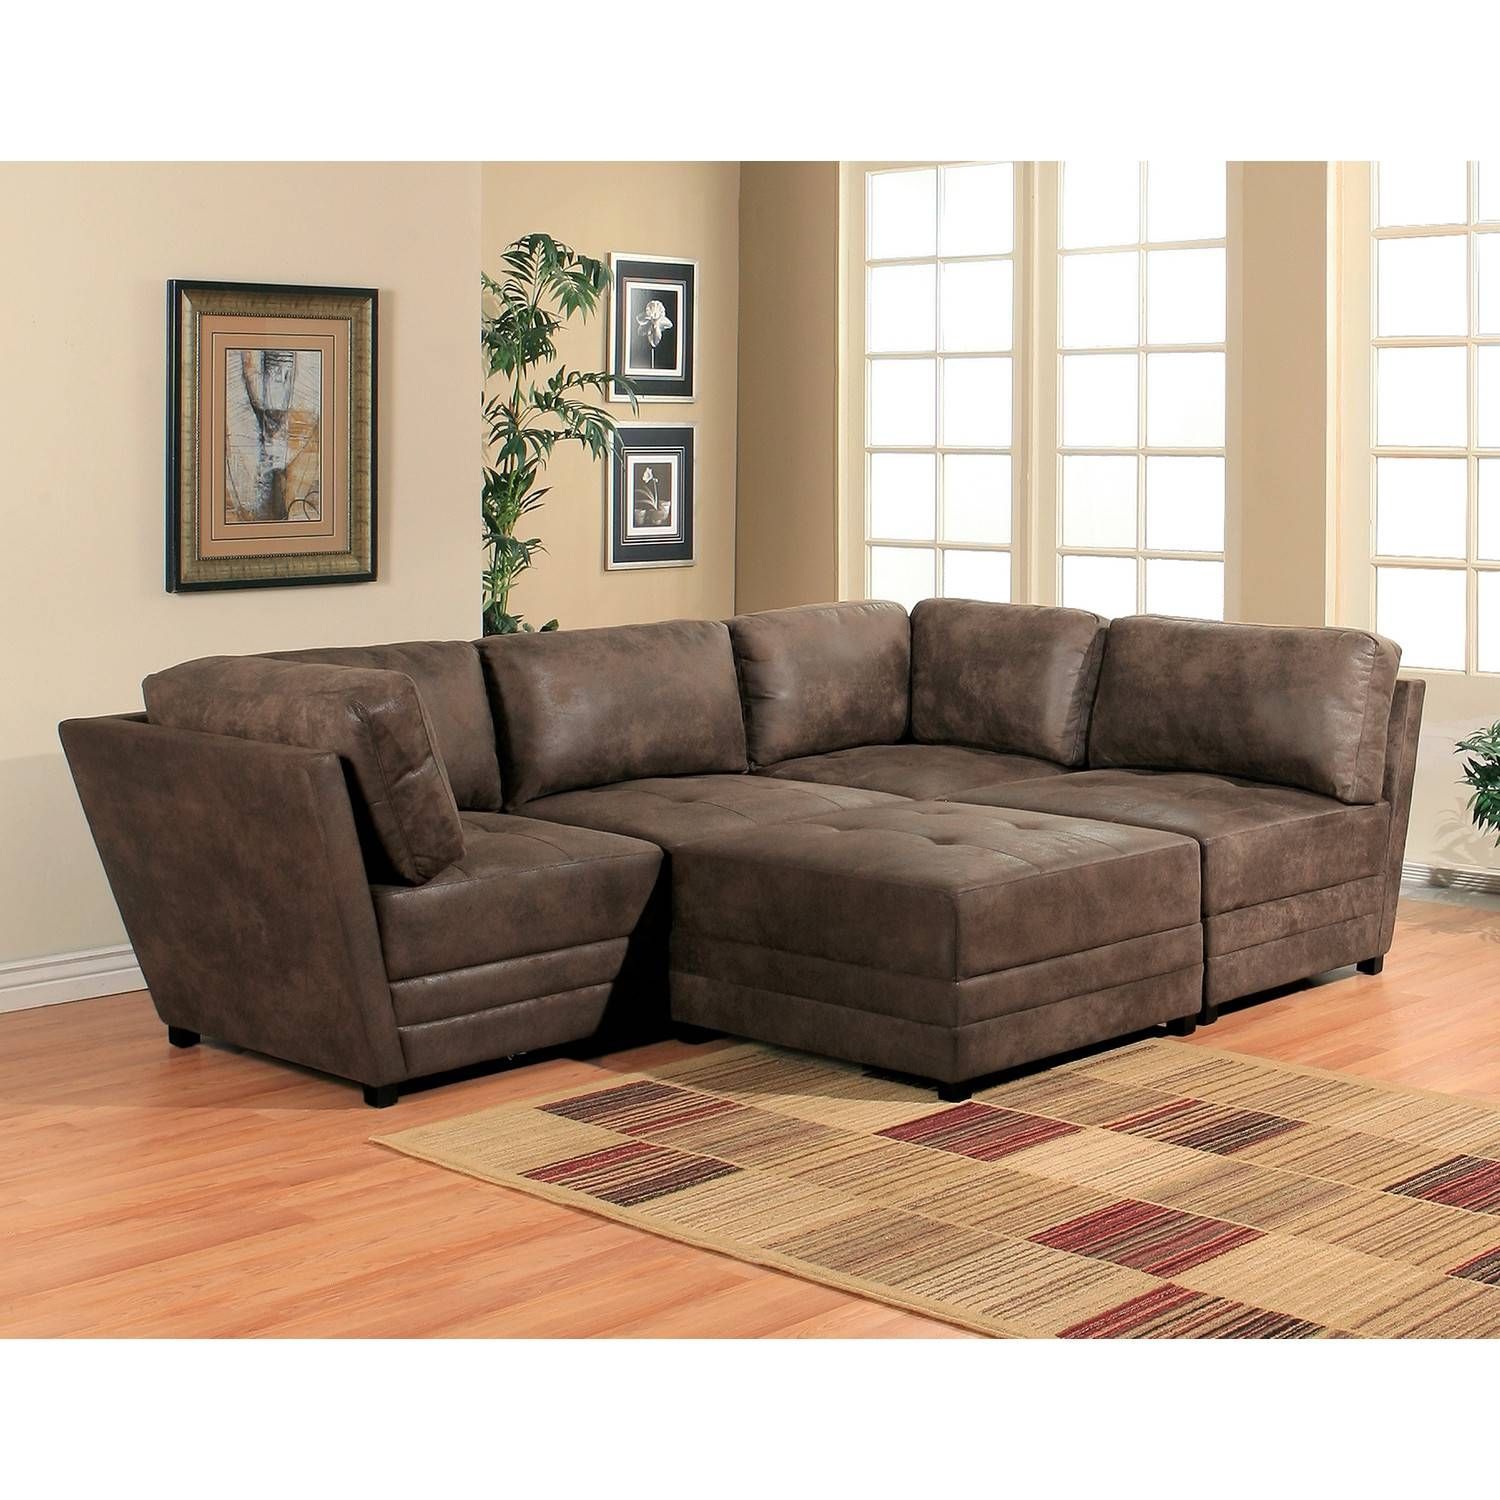 Perfect Wide Sectional Sofa 59 For Puzzle Sectional Sofa With Wide Inside Puzzle Sectional Sofas (View 6 of 15)